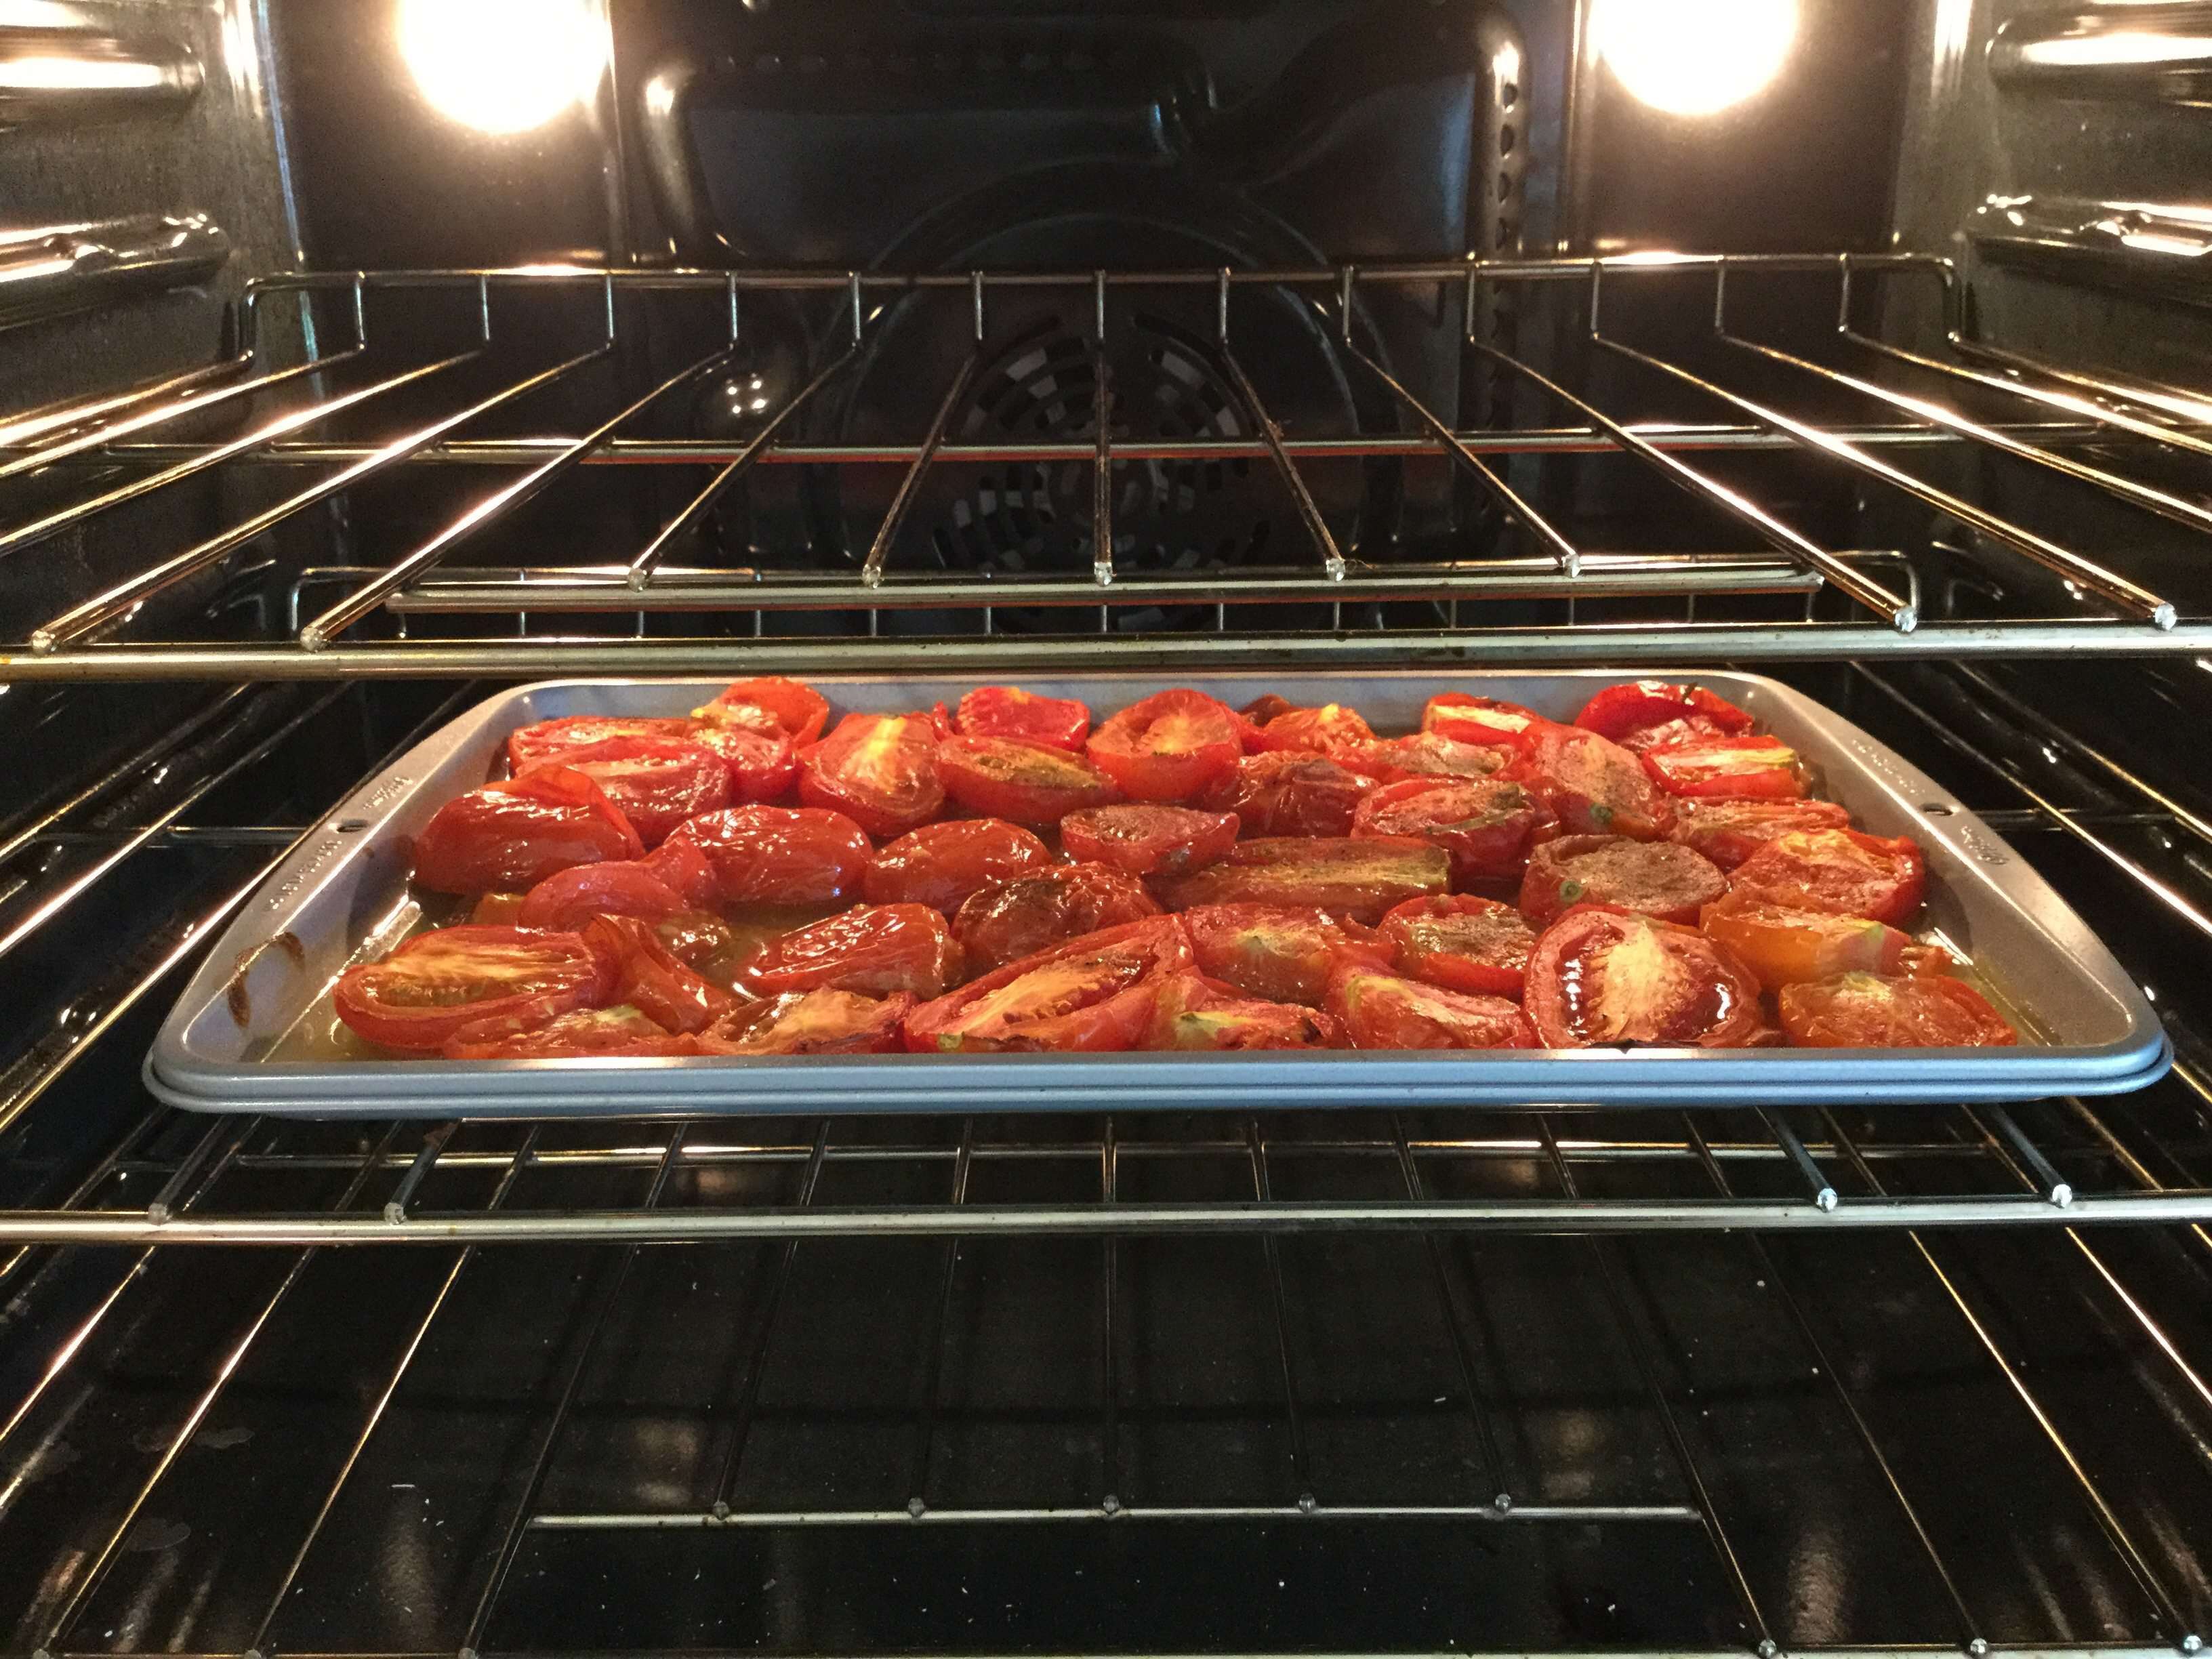 Bake at 400 degrees for approximately 25 minutes.